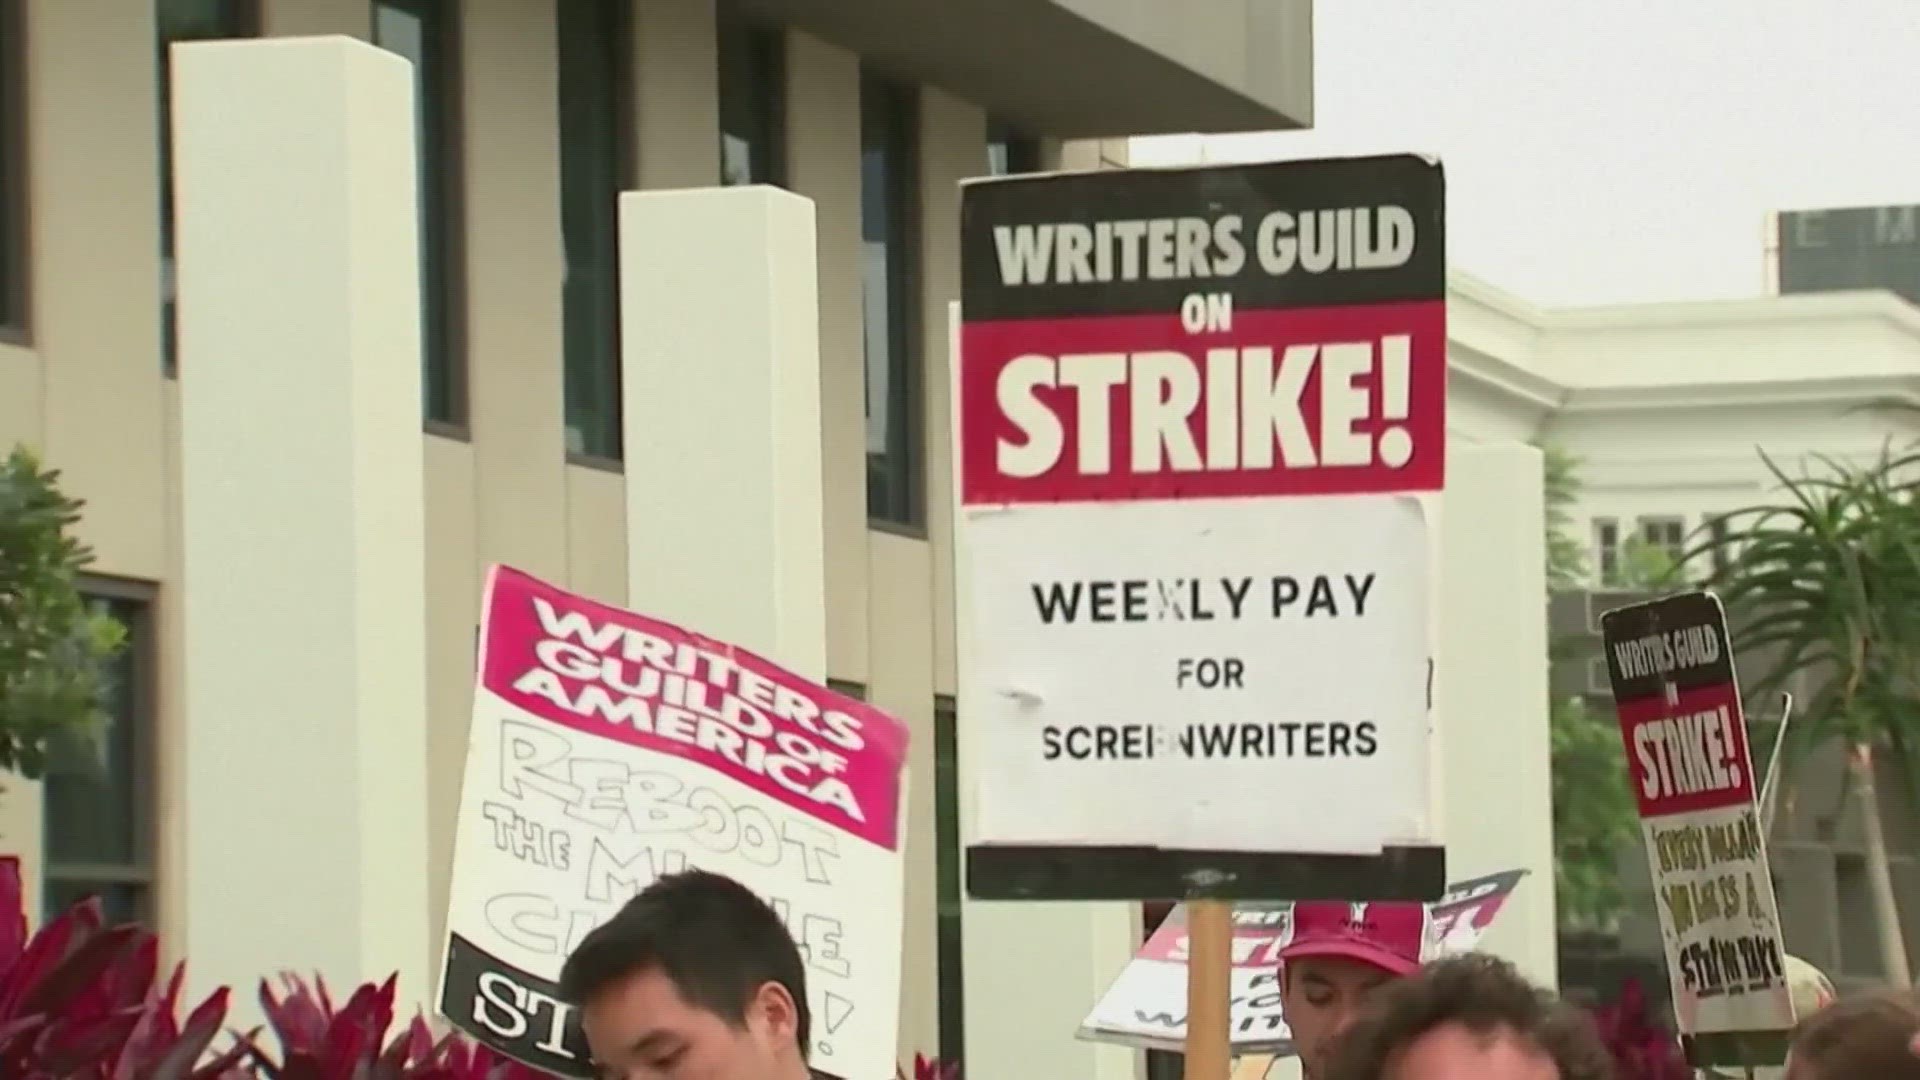 A tentative deal has been reached to end Hollywood’s writers strike after nearly five months.